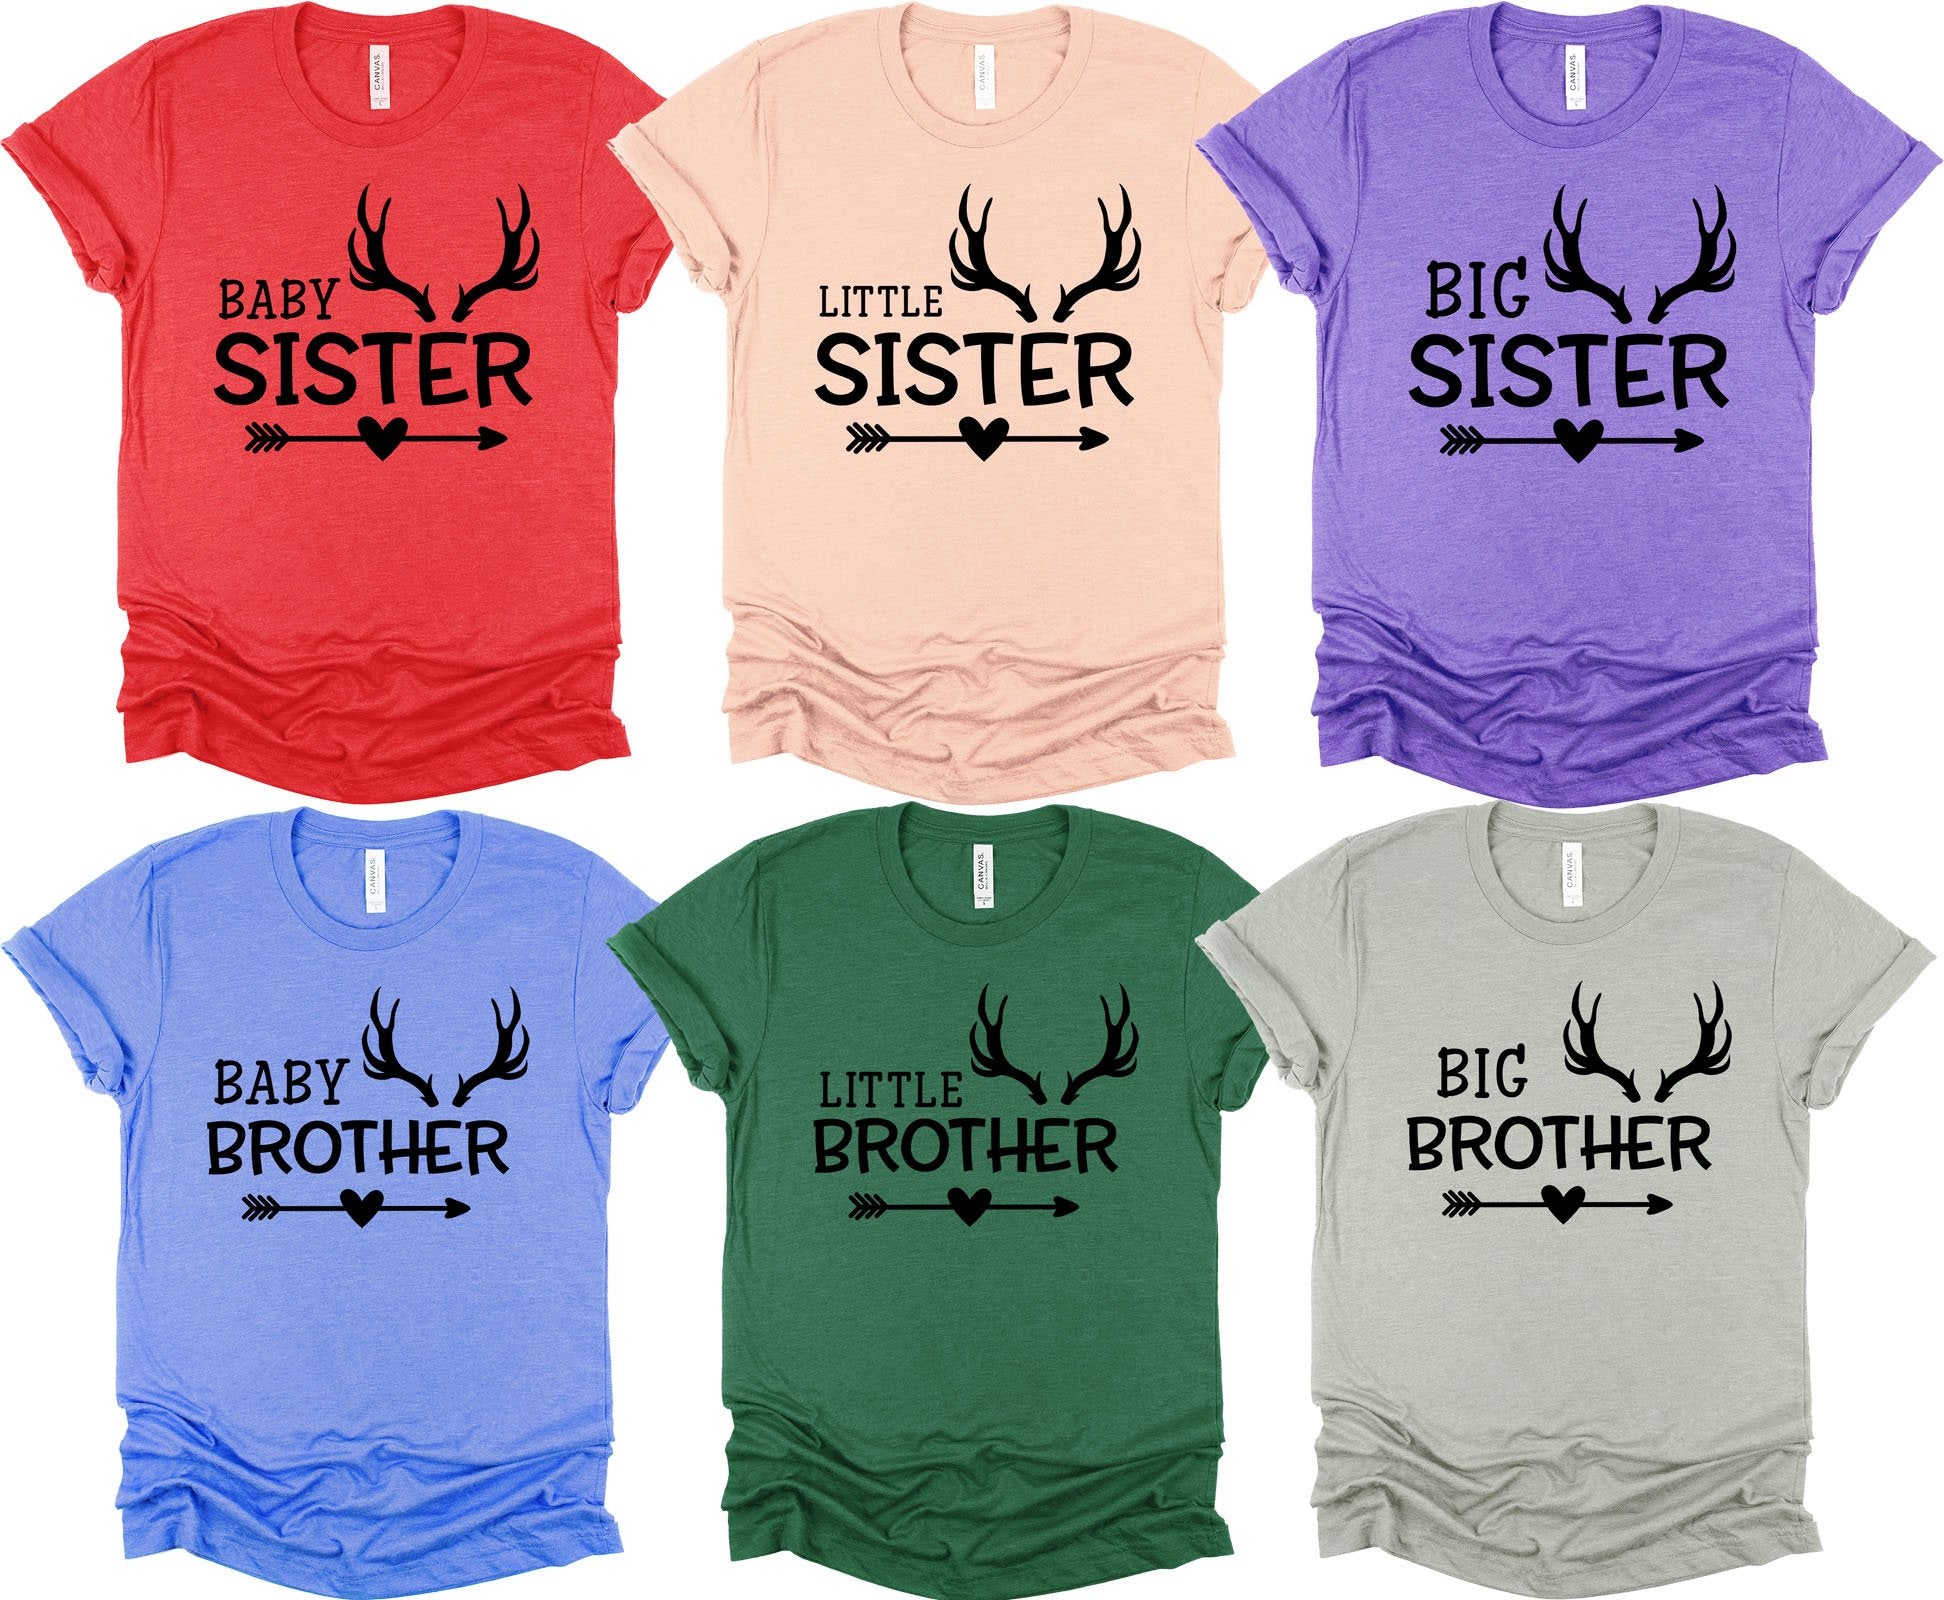 Baby Brother Graphic Tee Graphic Tee